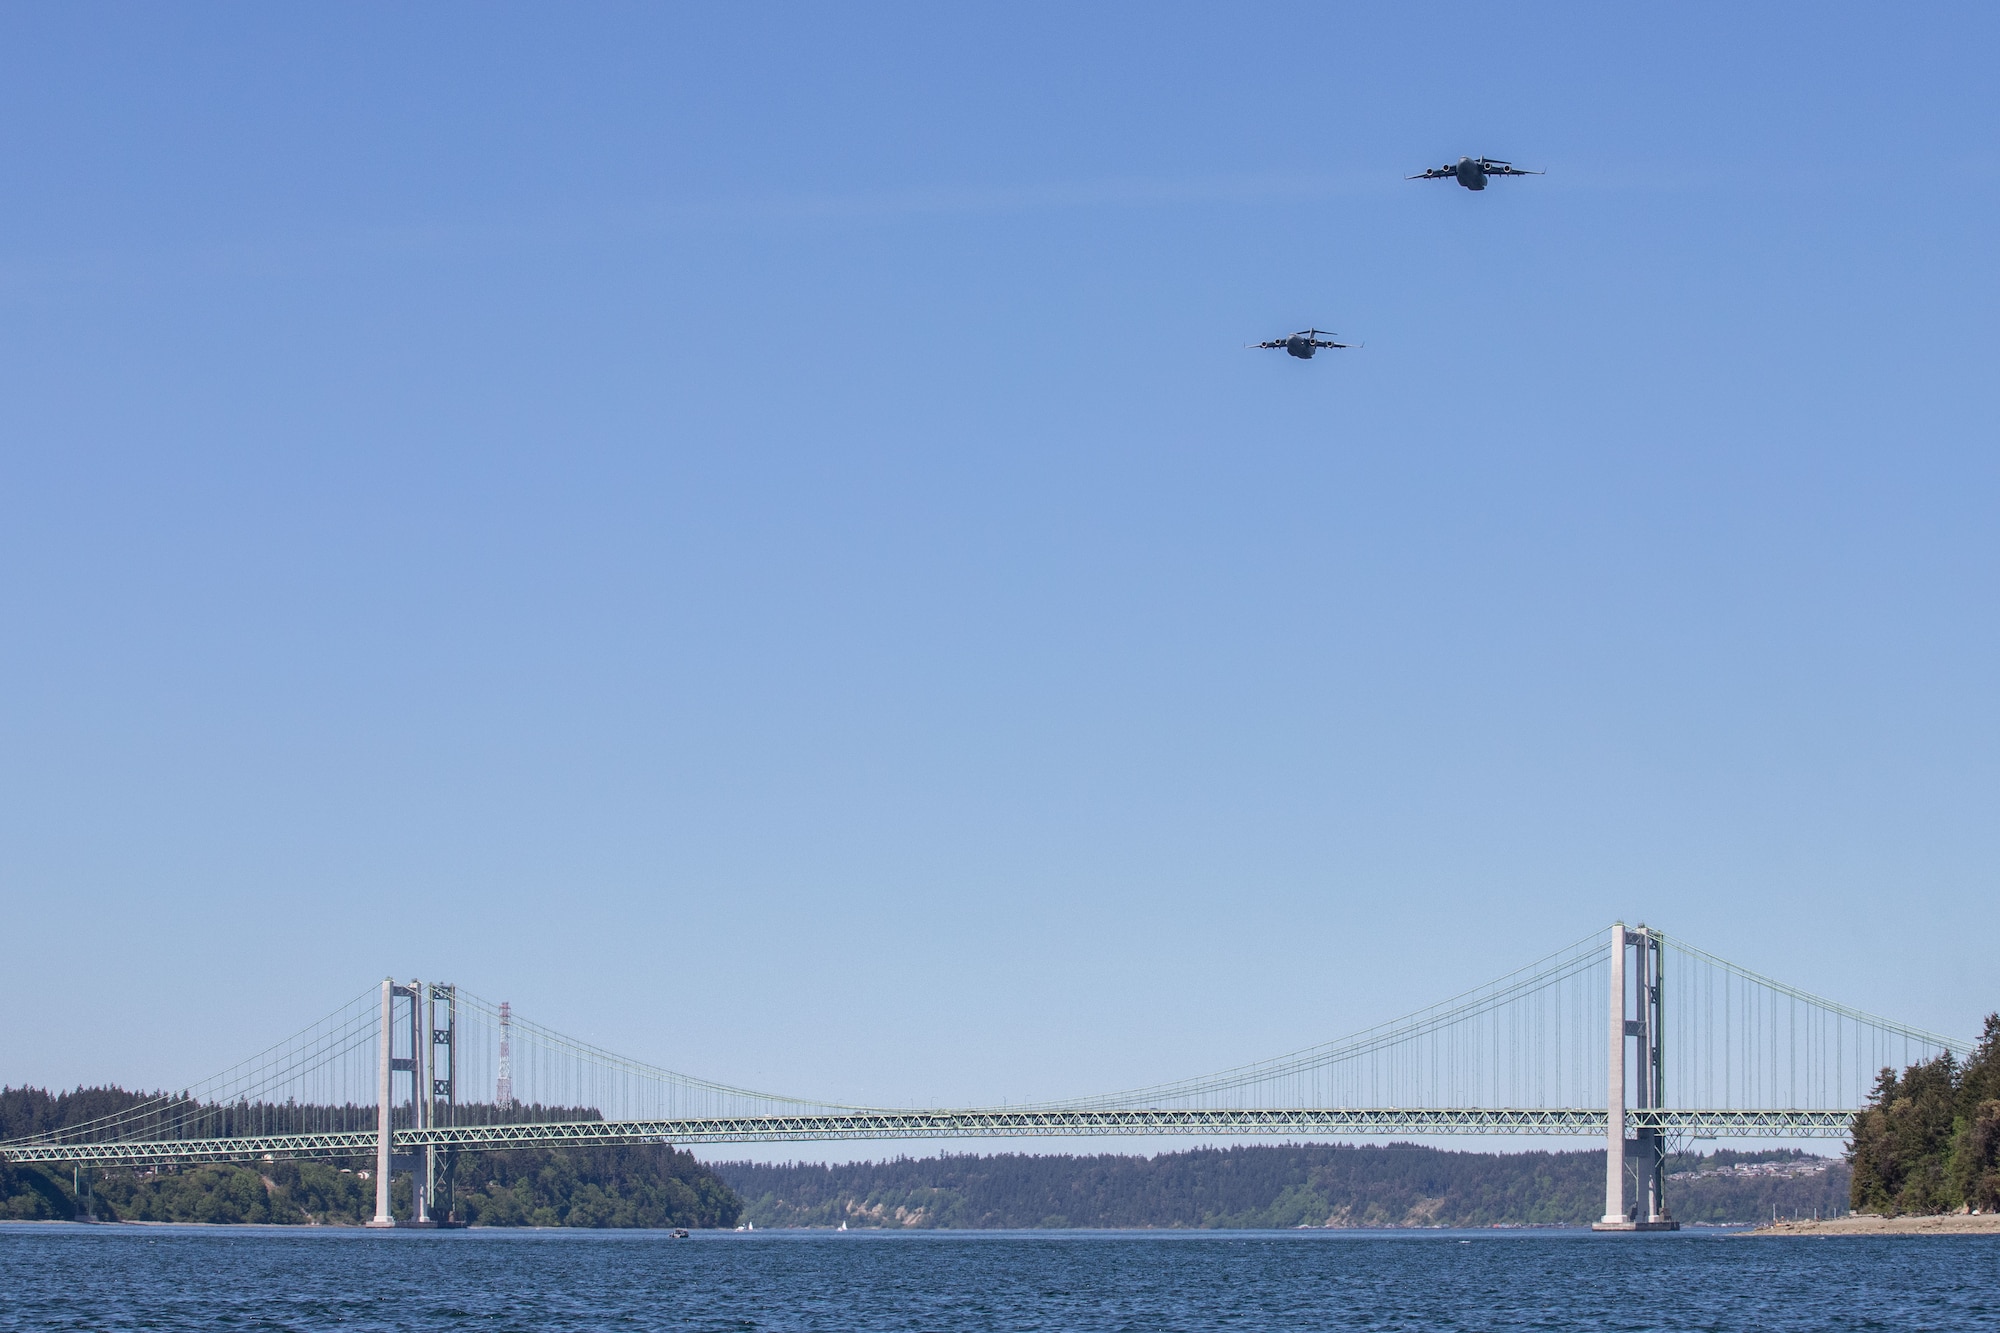 Two C-17 Globemaster IIIs assigned to the 62nd Airlift Wing conduct an Air Force Salutes morale flyover above the Tacoma Narrows Bridge in Tacoma, Wash., May 8, 2020. The flyover honored the American heroes at the forefront in the fight against COVID-19. (U.S. Air Force photo by Staff Sgt. Joshua Smoot)